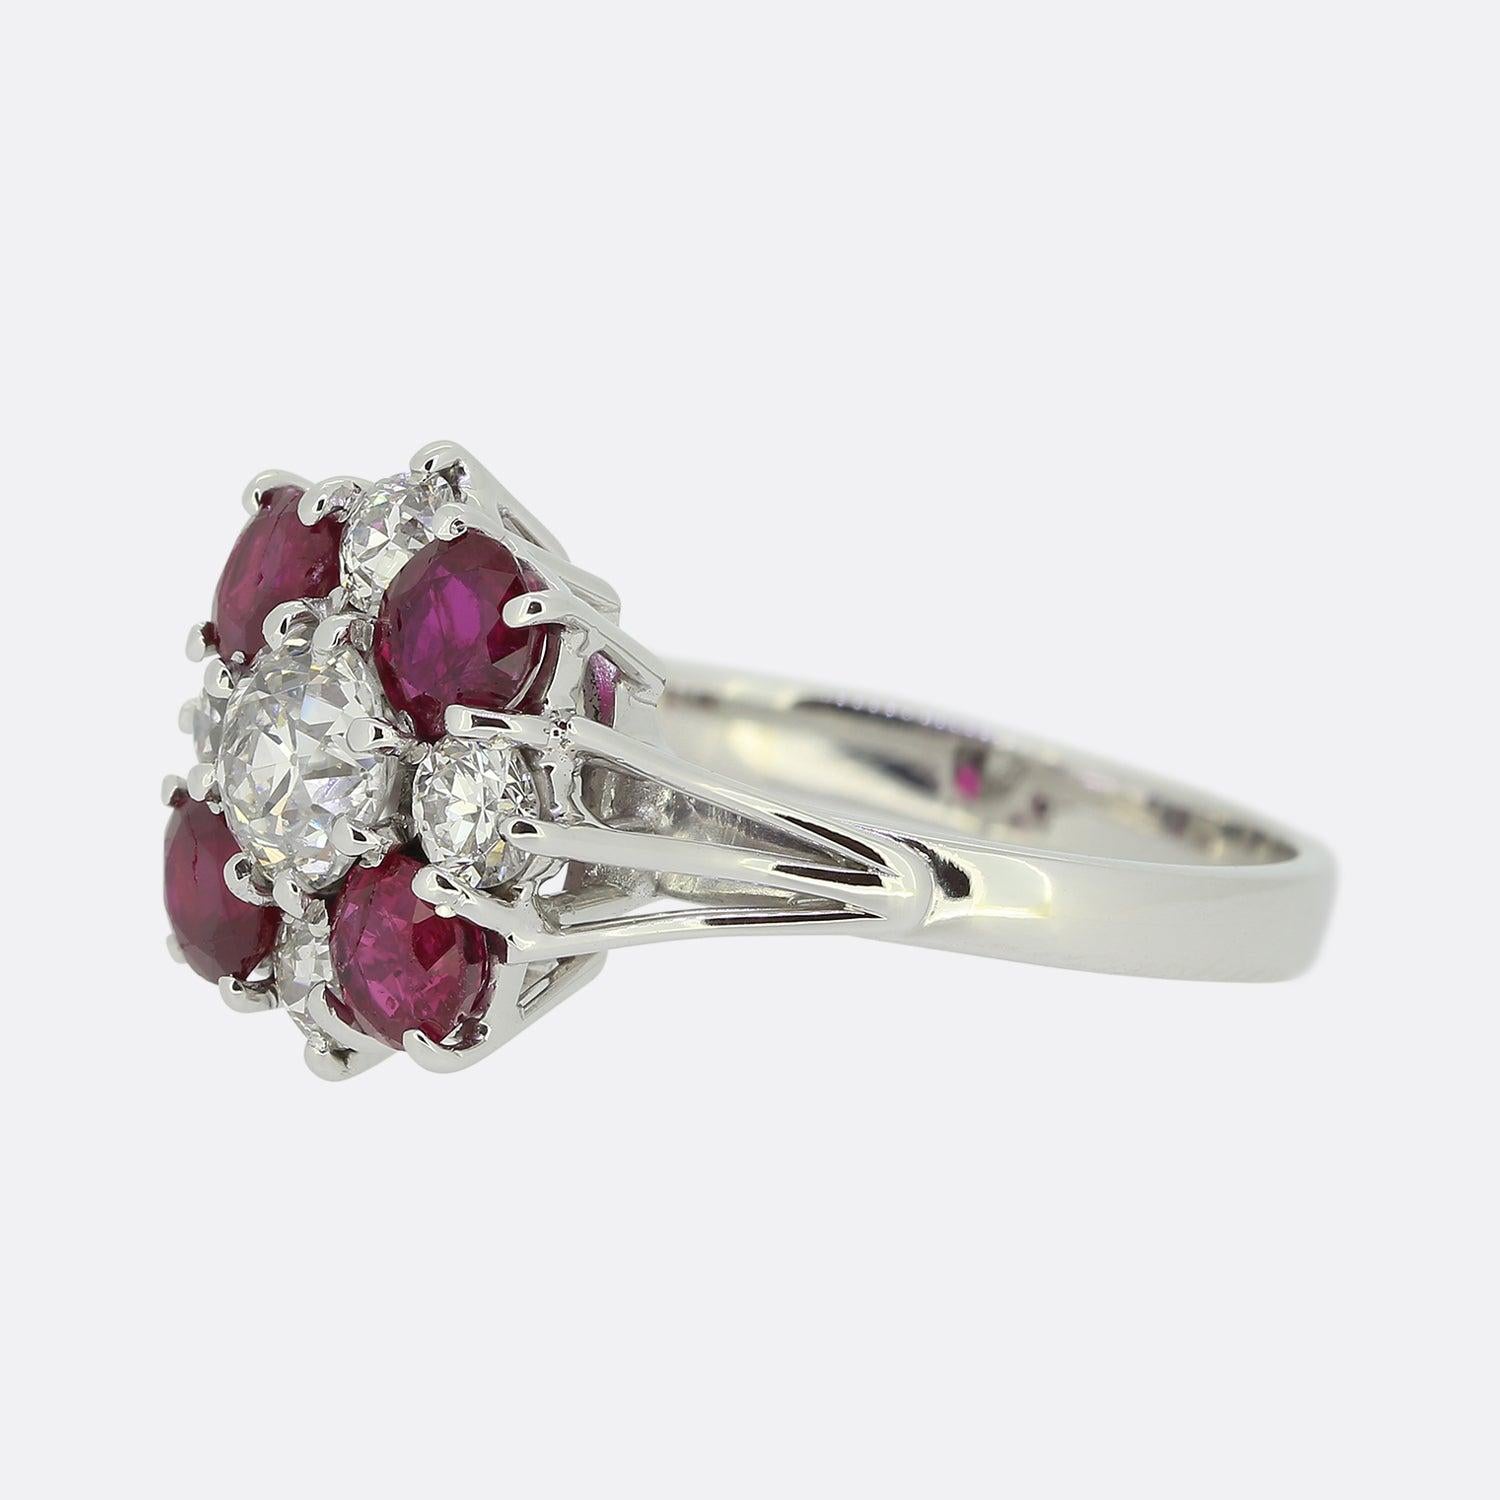 Here we have an 18ct white gold ruby and diamond cluster ring.  The diamonds are old European cuts and the centre stone is approximately 0.70 carats. The bright white old cut diamonds are highly complimented by the contrasting rich red of the four